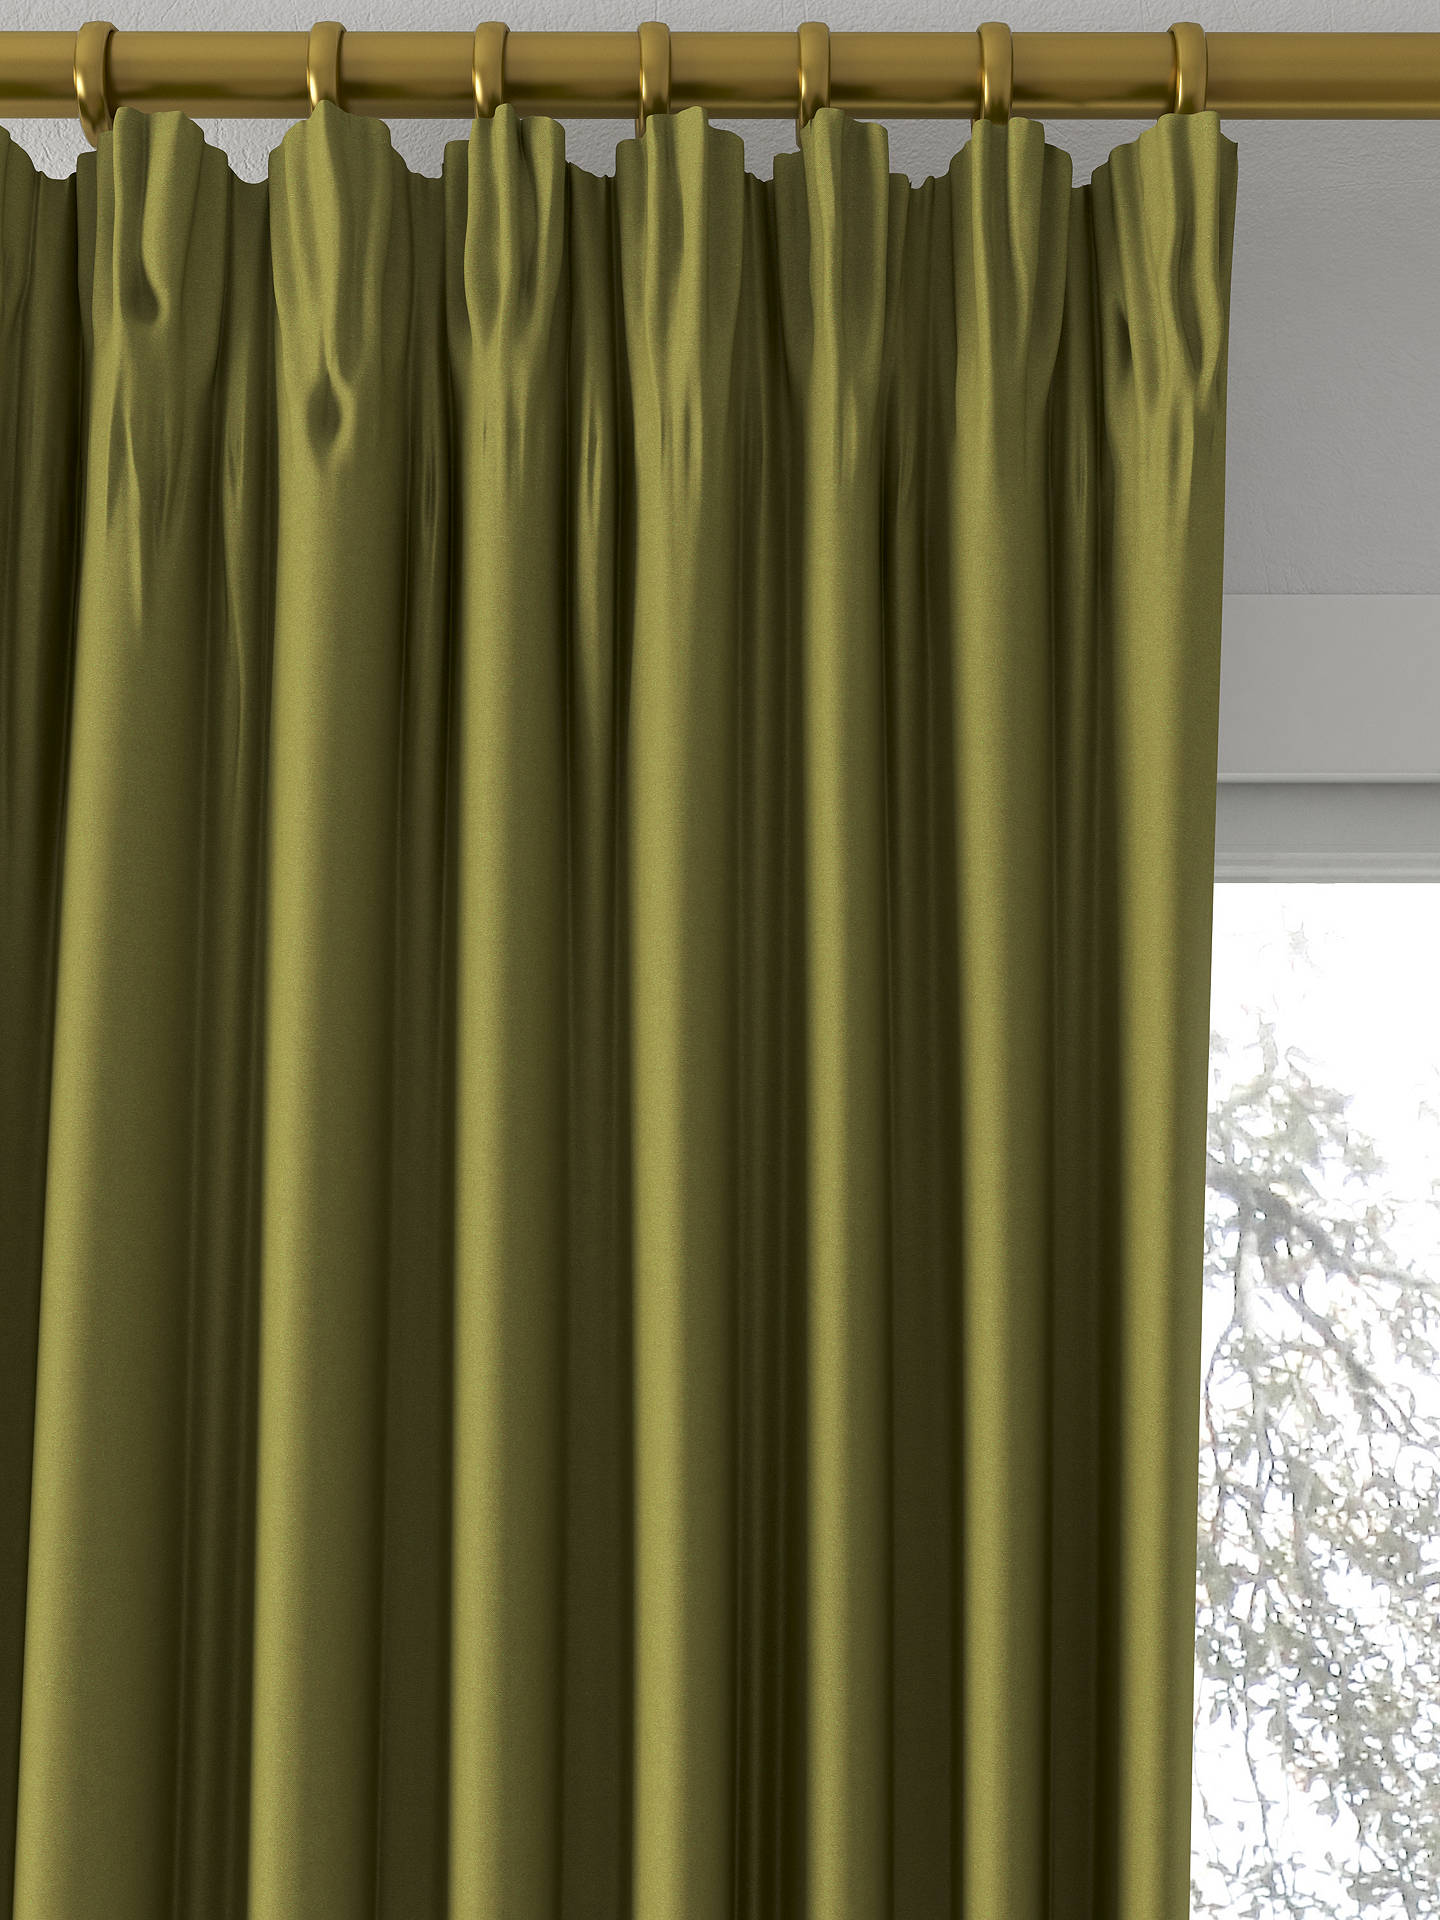 Harlequin Empower Plain Made to Measure Curtains, Olive